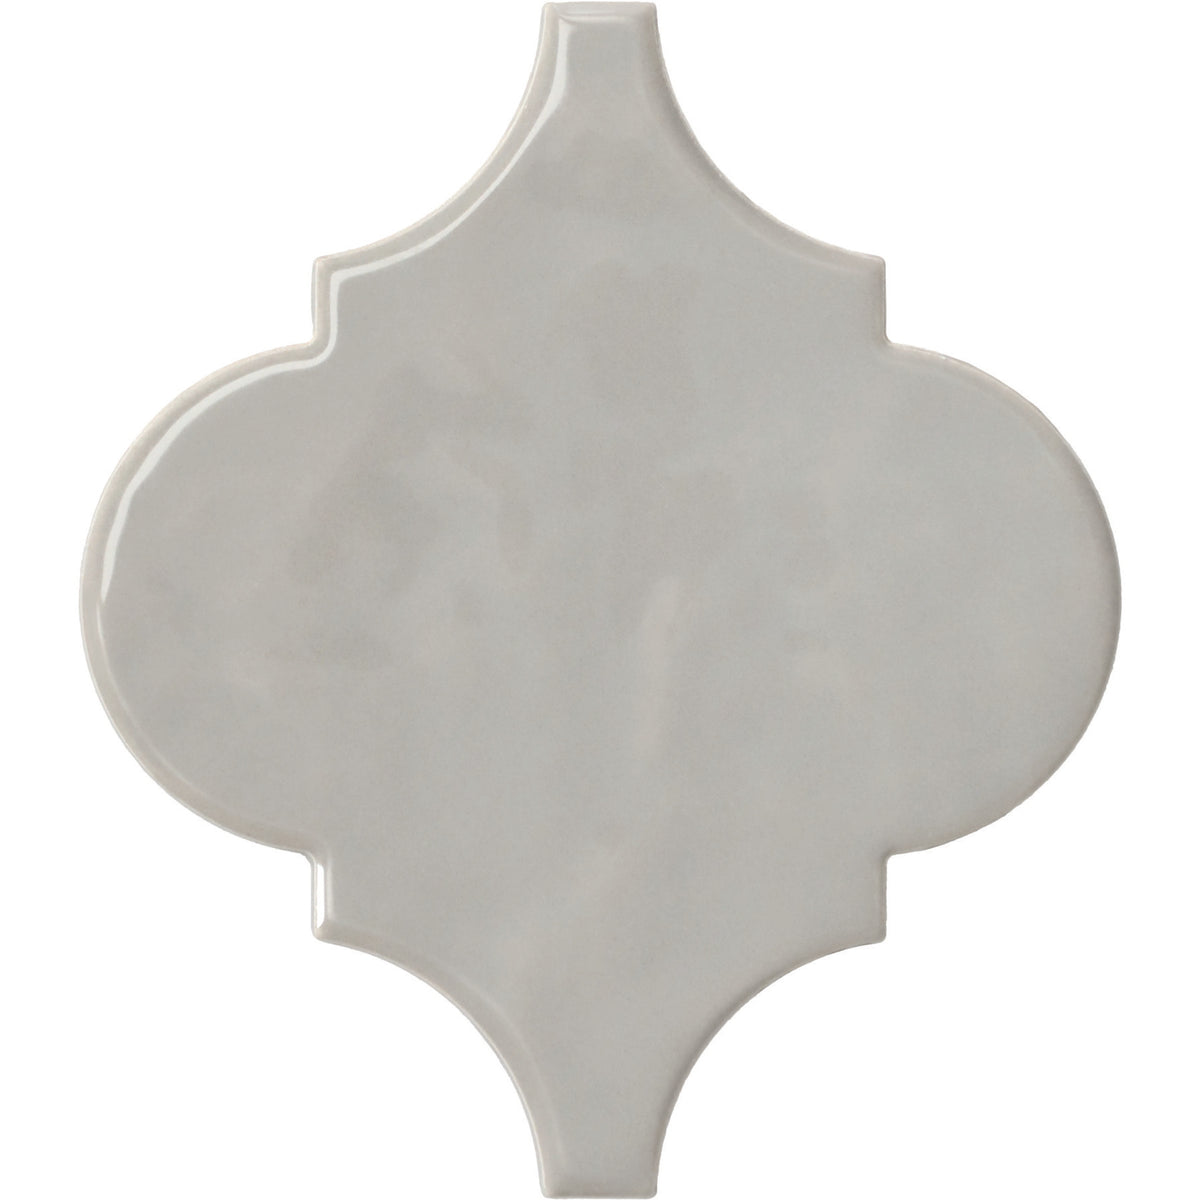 American Olean - Playscapes Arabesque Wall Tile - Silverside PS73